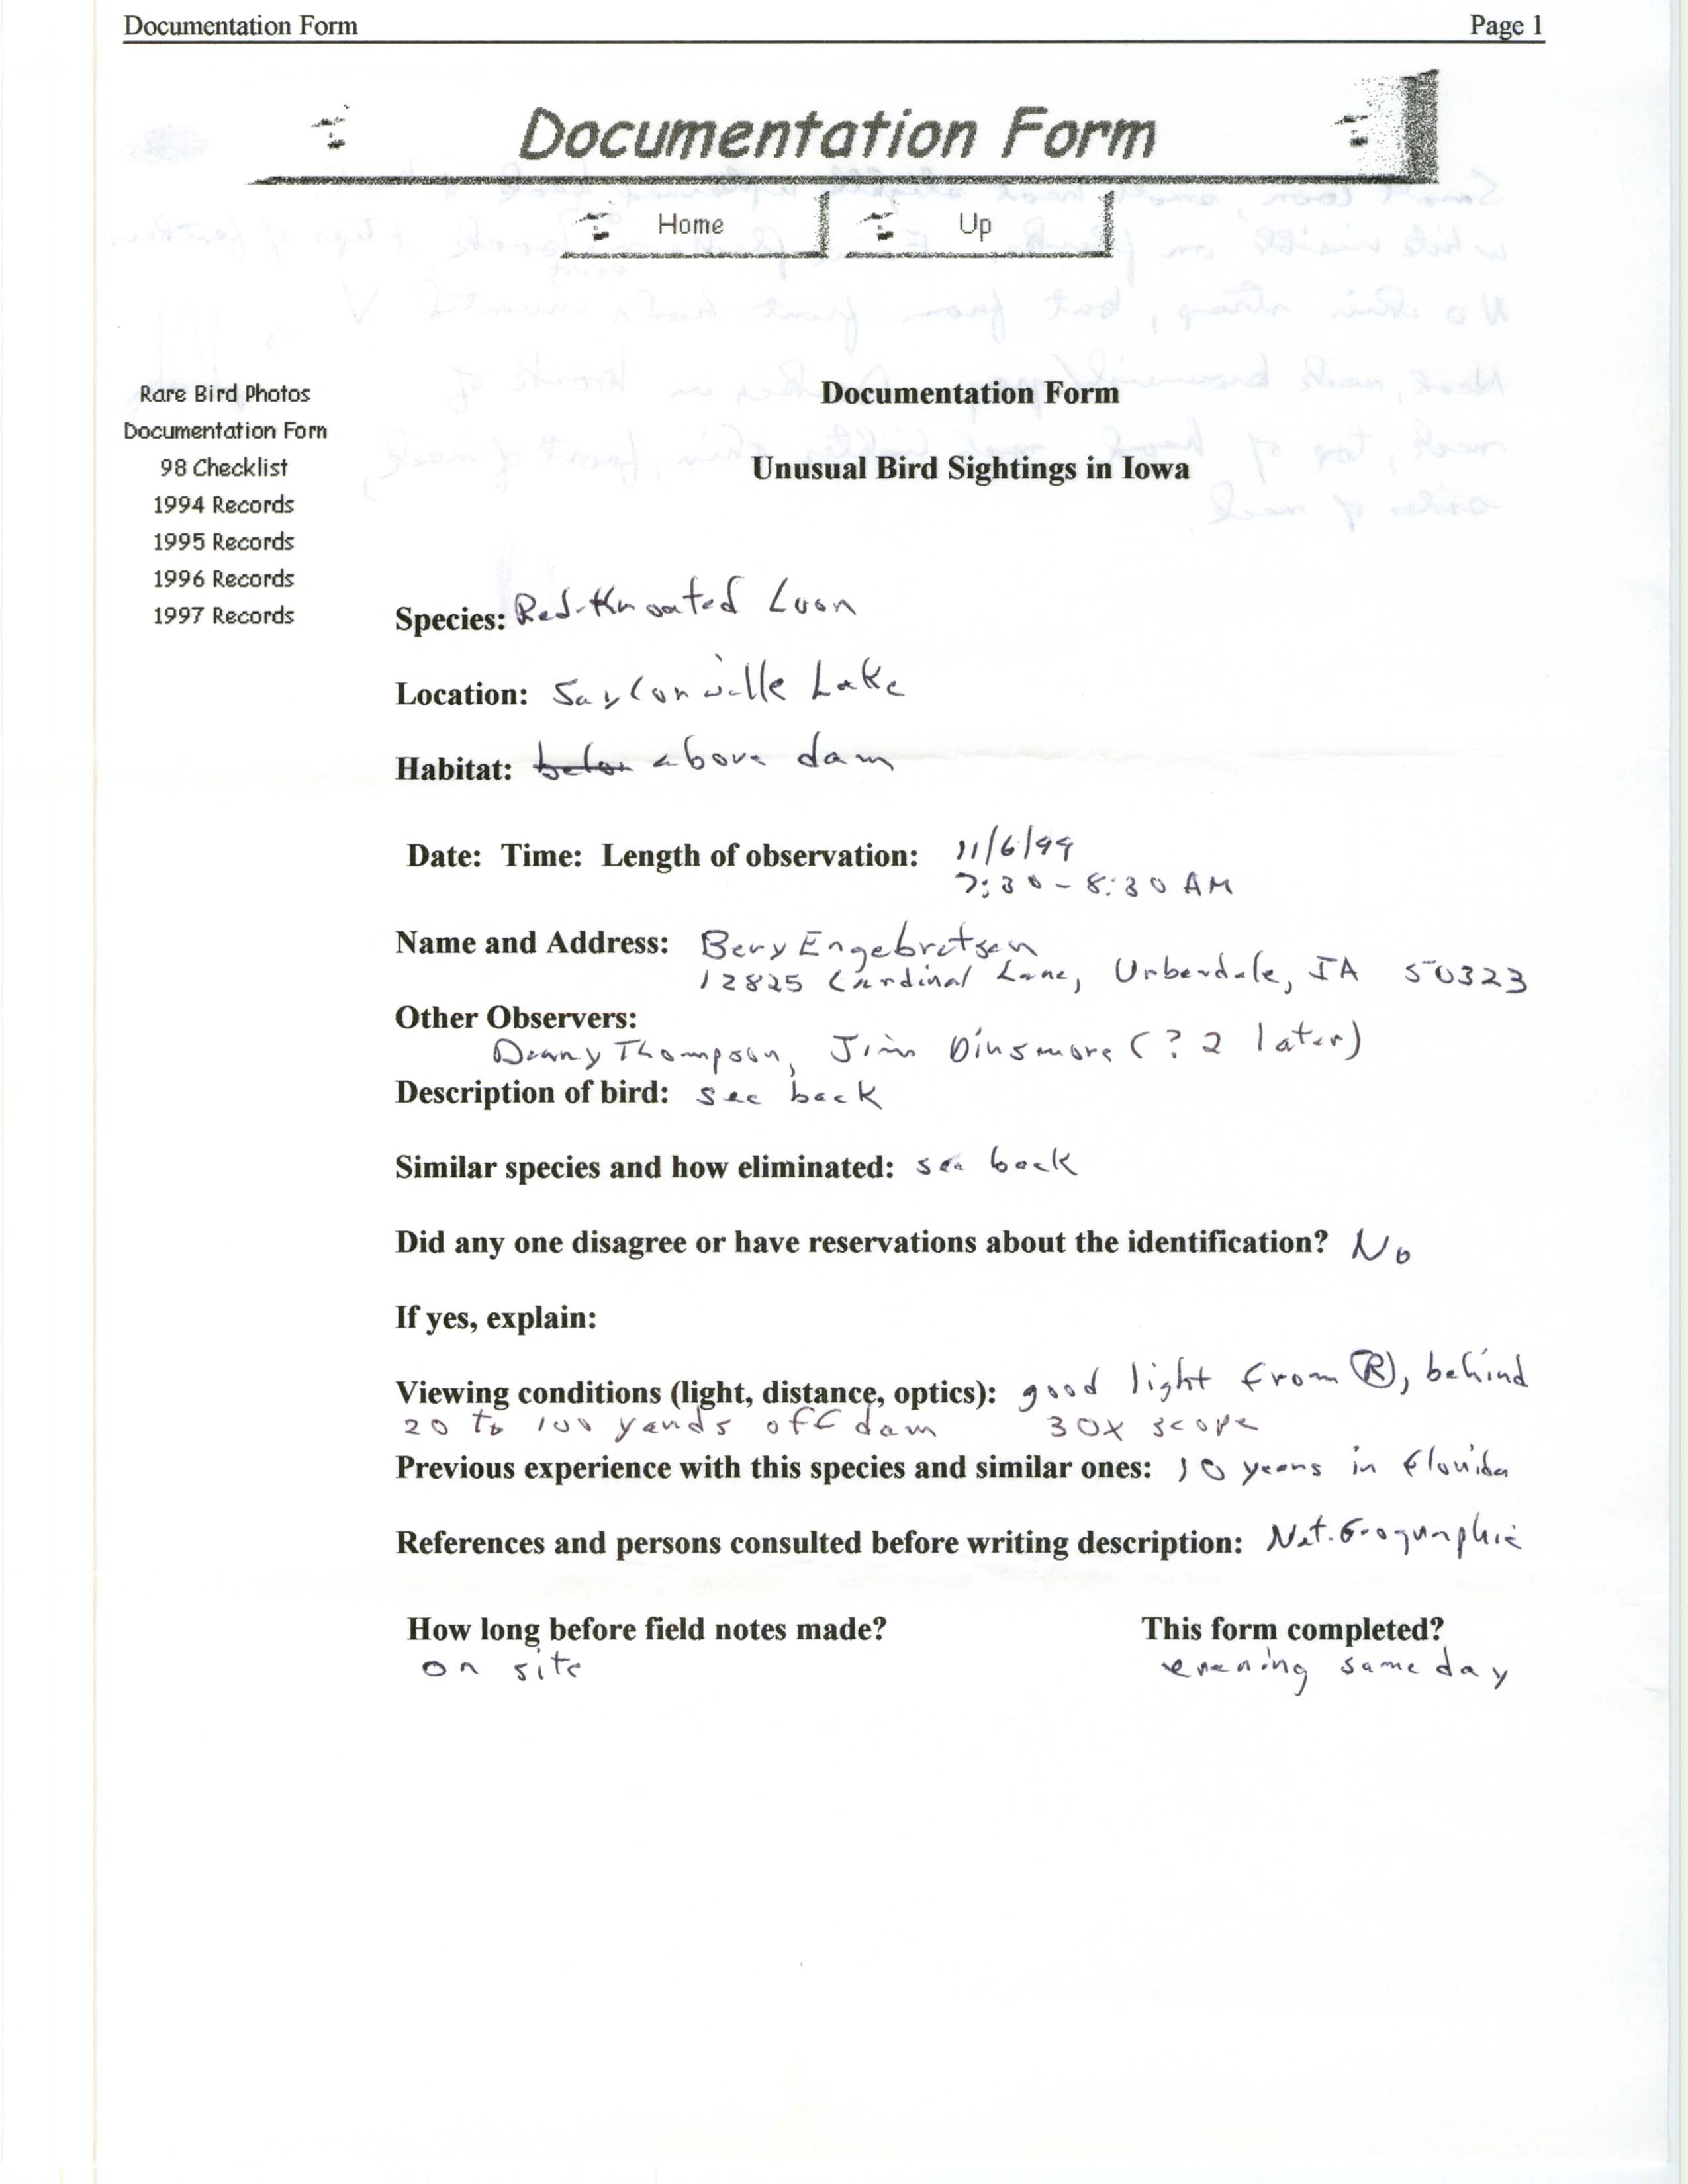 Rare bird documentation form for Red-throated Loon at Saylorville Lake, 1999